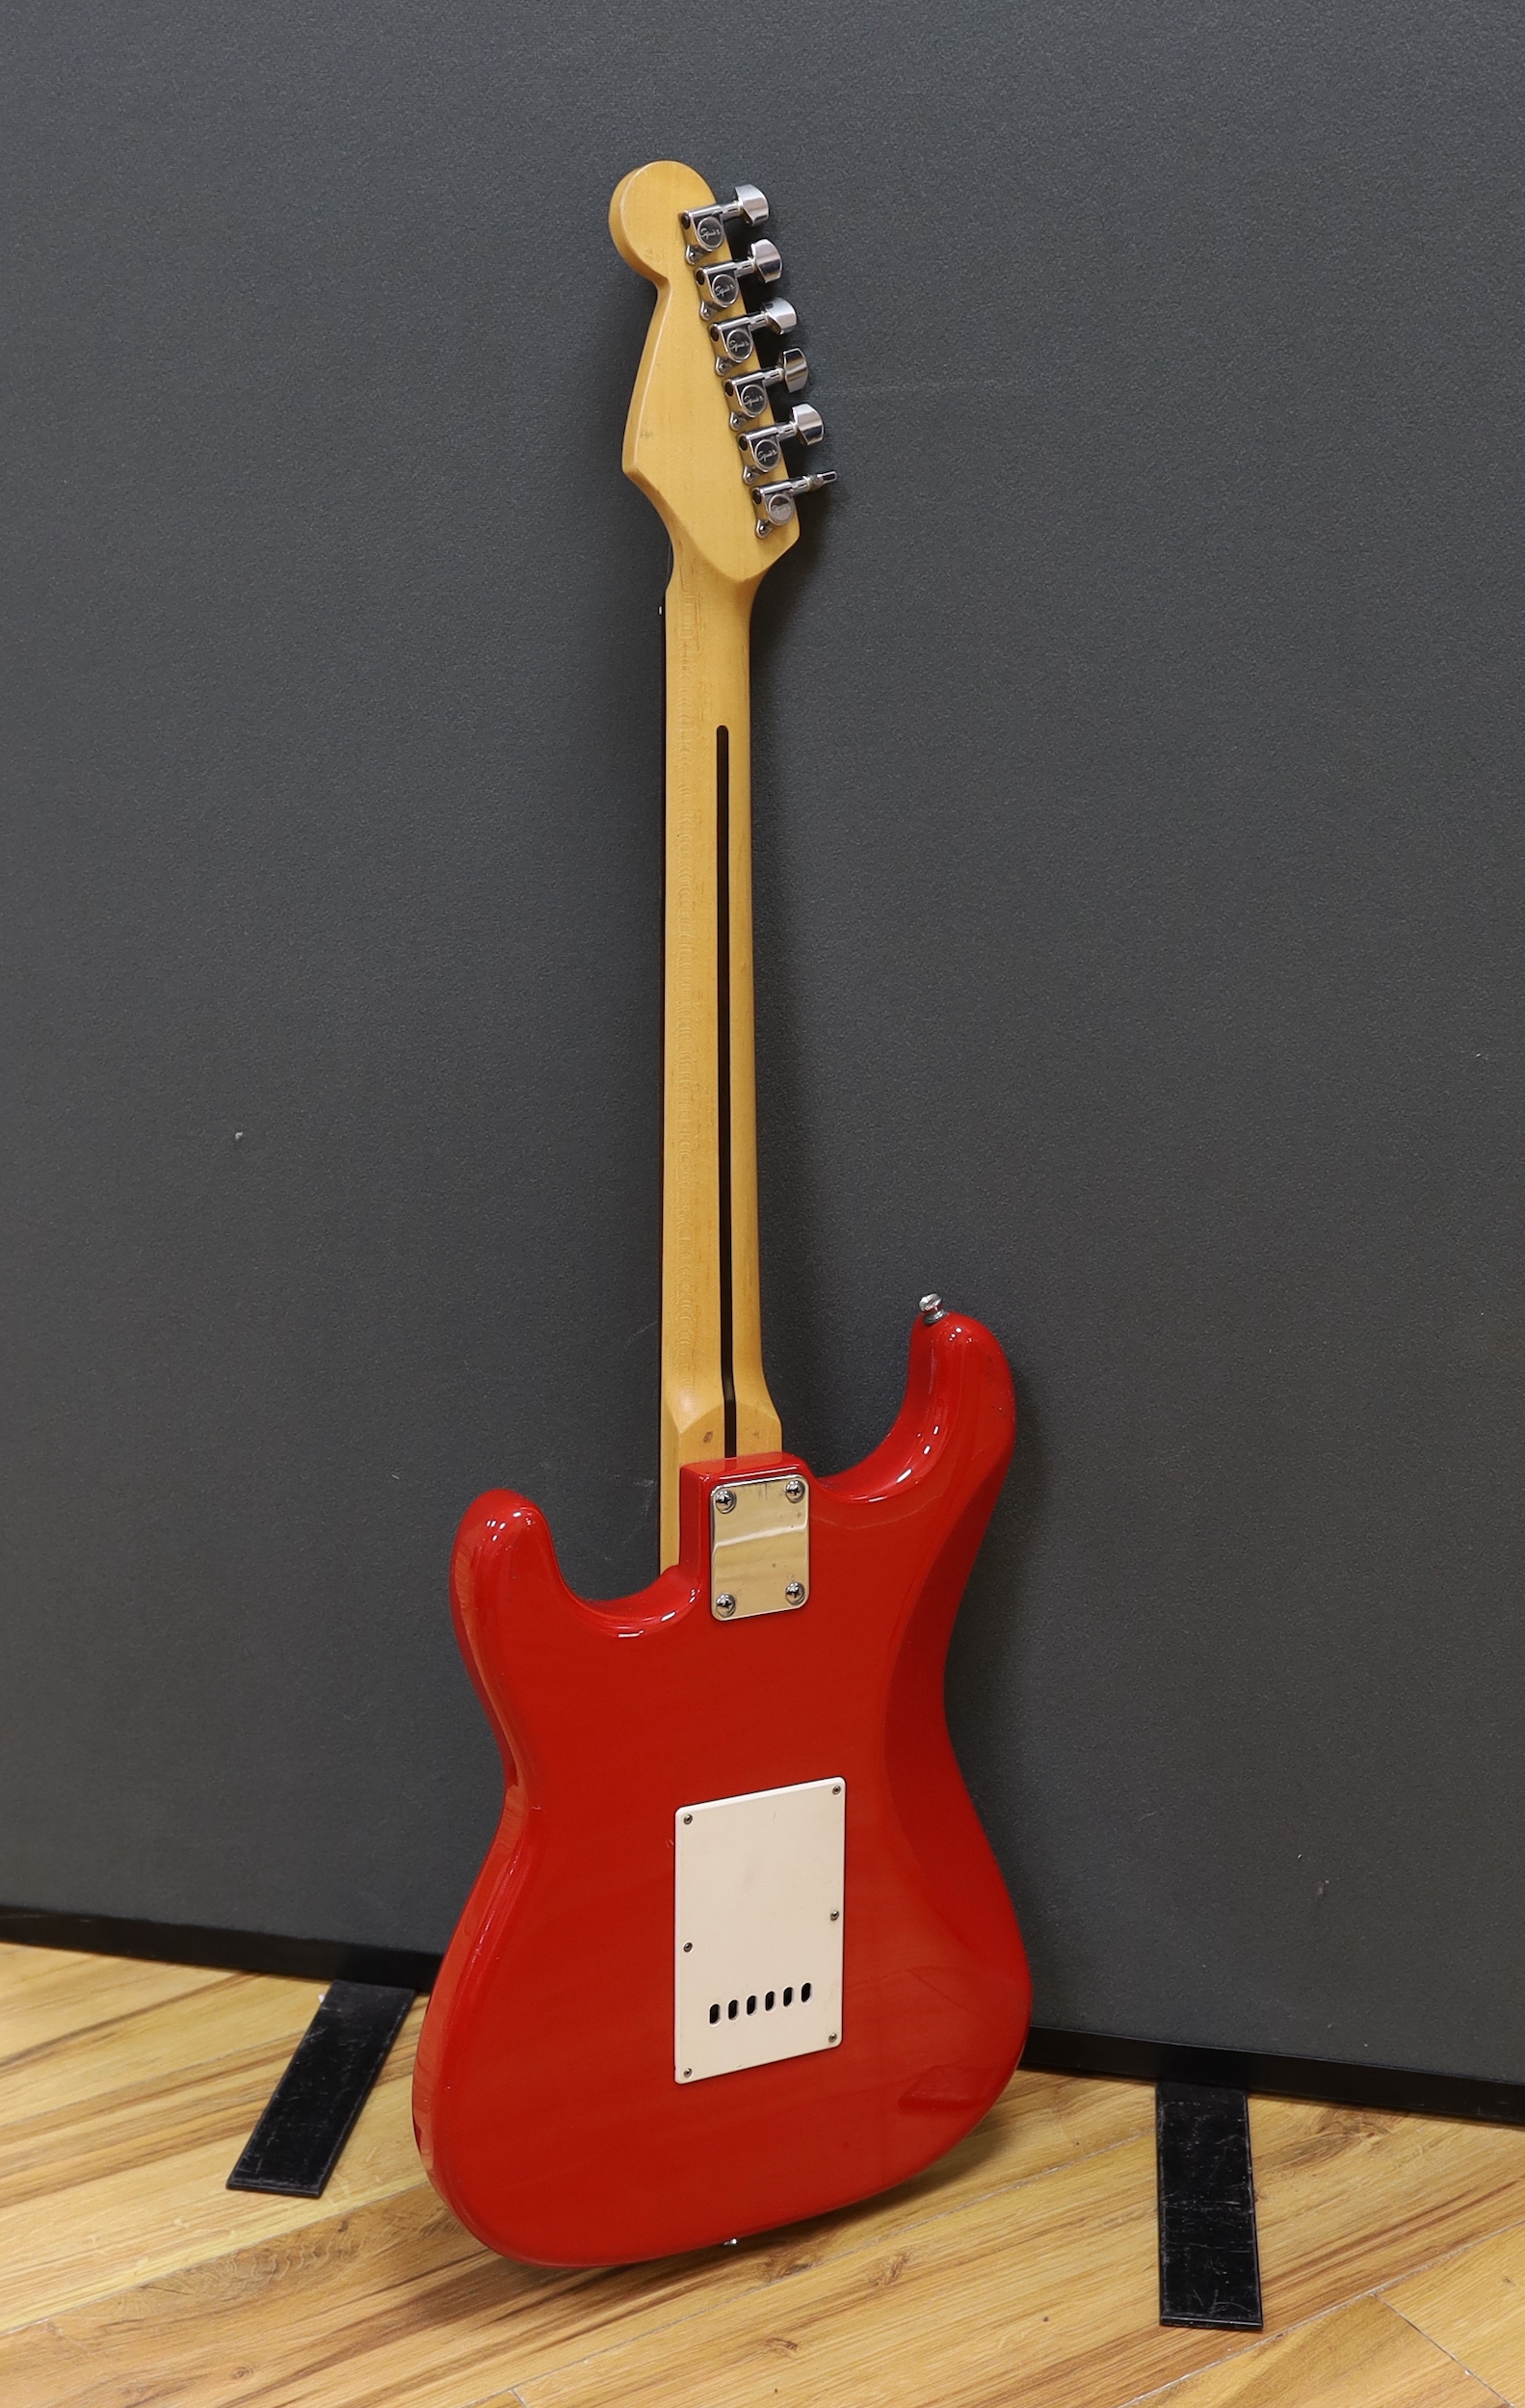 A Squier Strat by Fender electric guitar with rosewood neck and red lacquer body